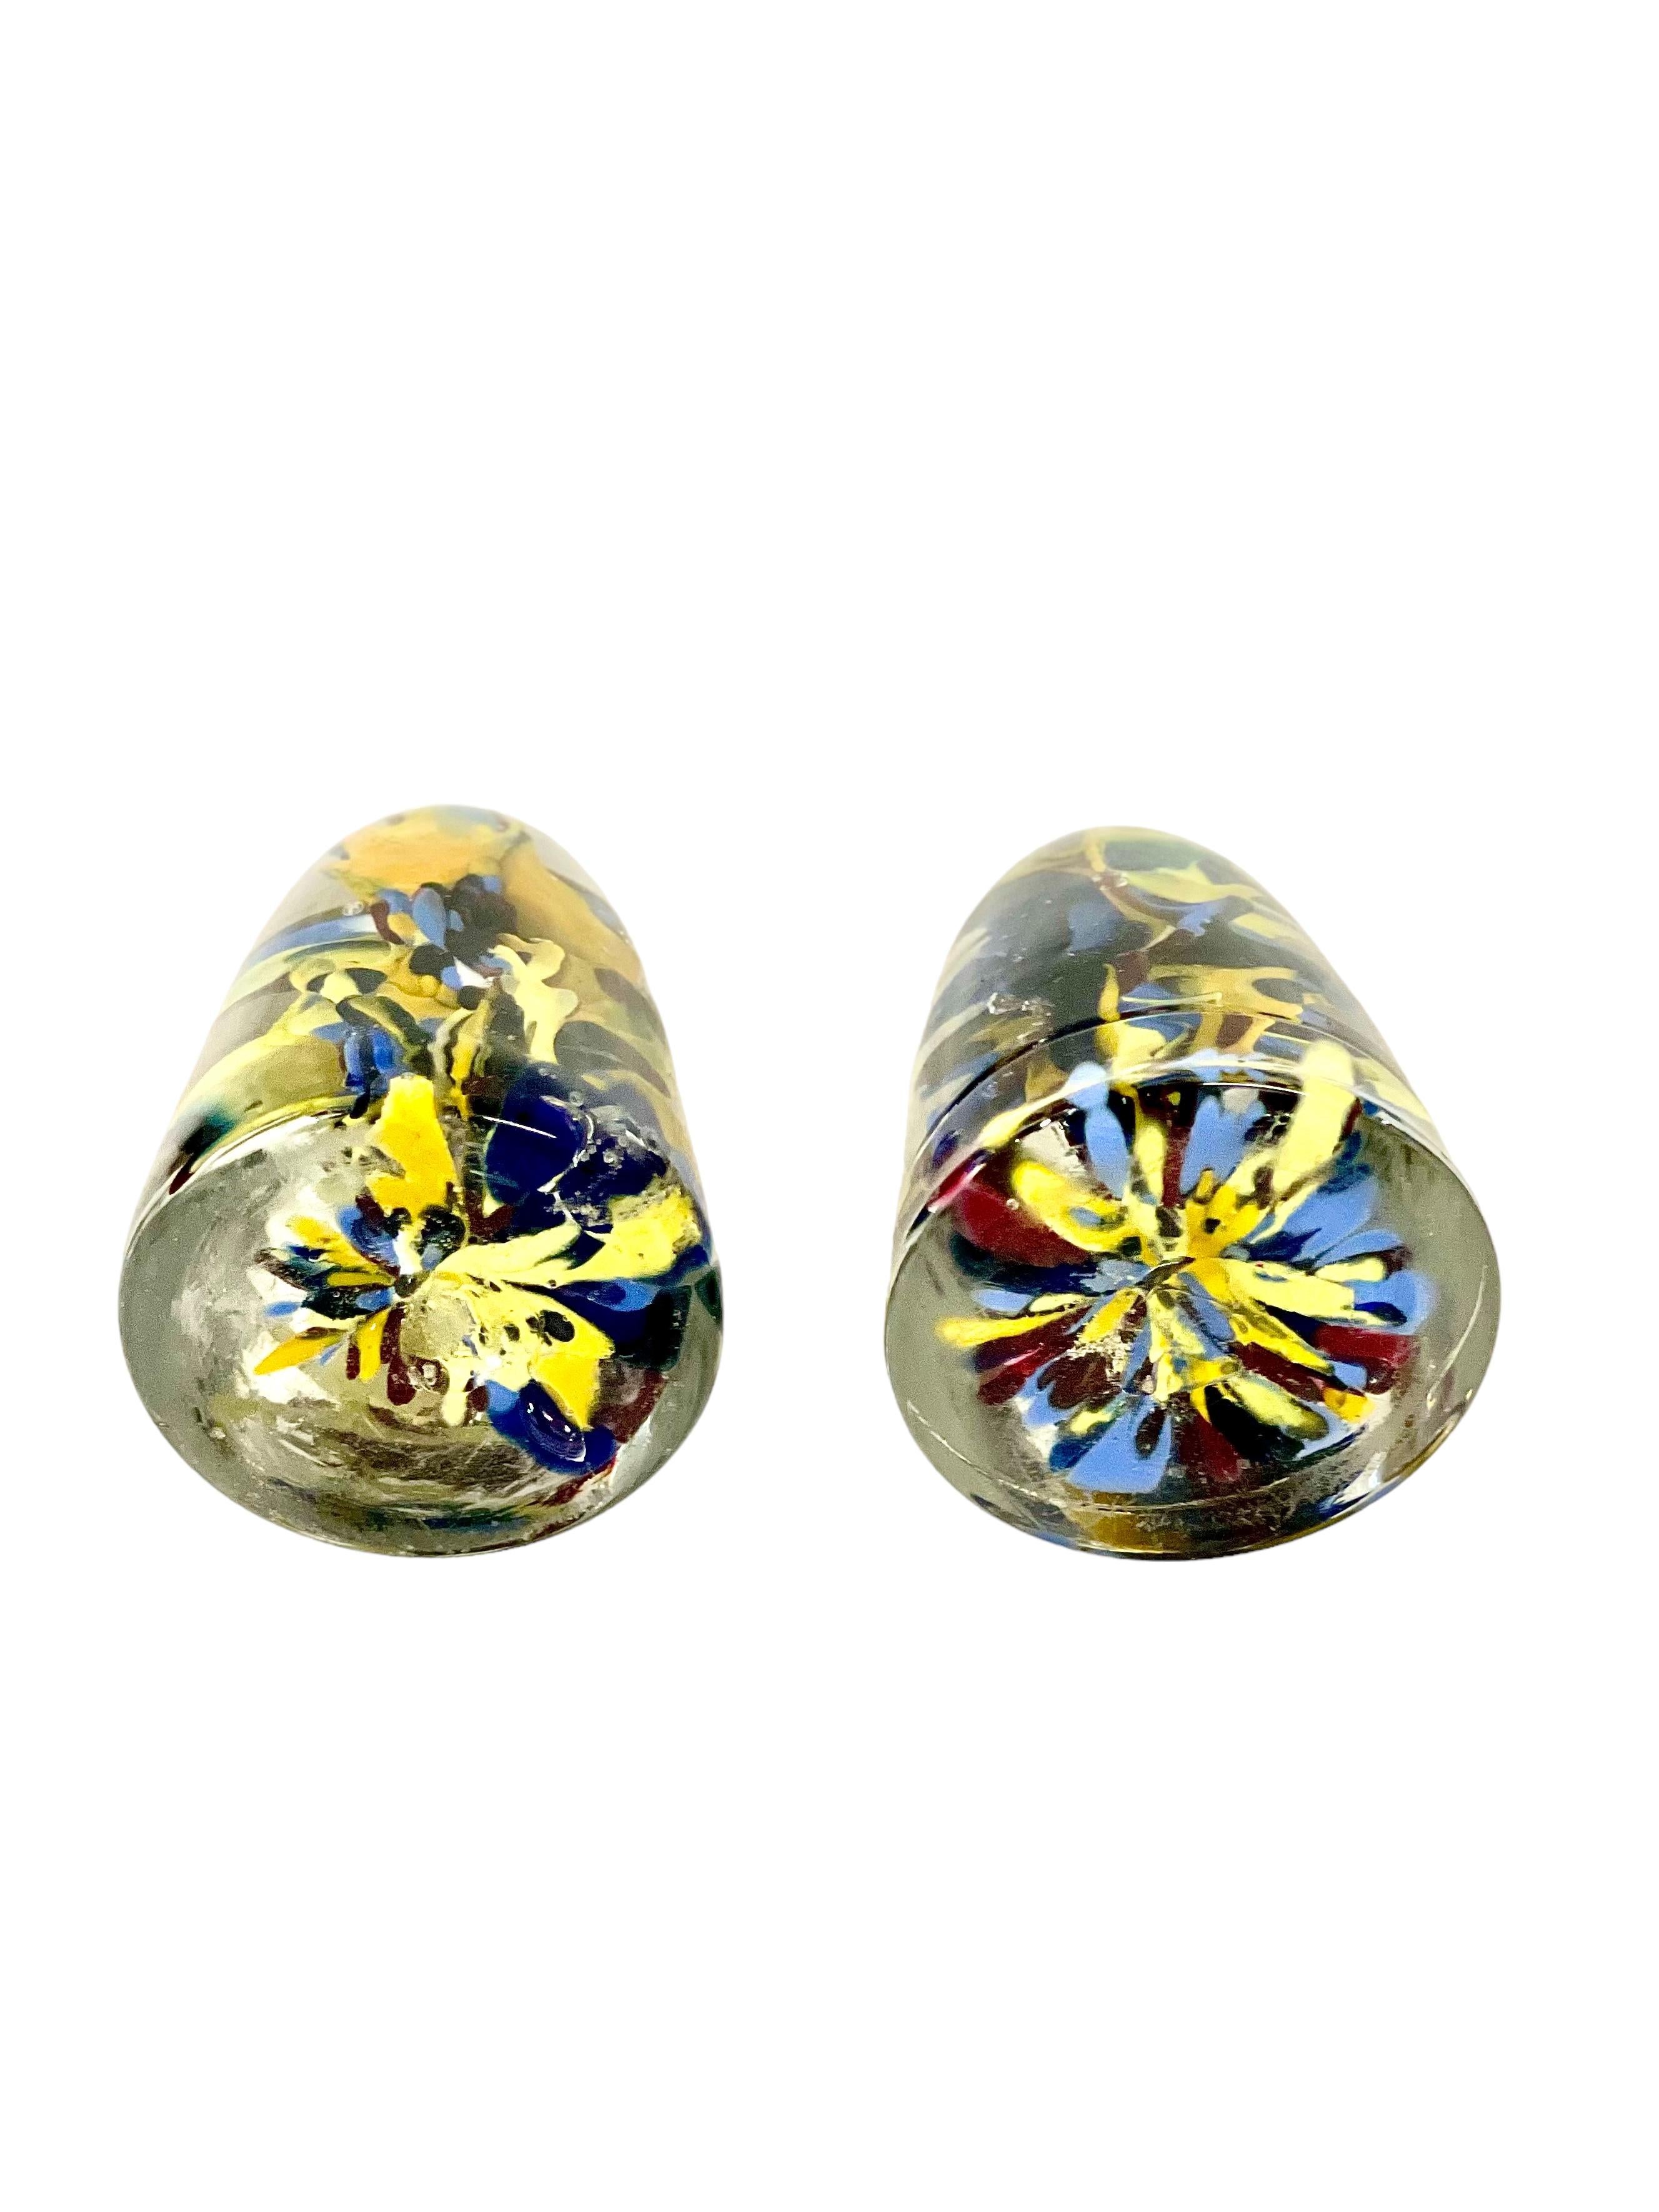 Pair of 19th Century Handblown Crystal Shell Paperweights For Sale 2